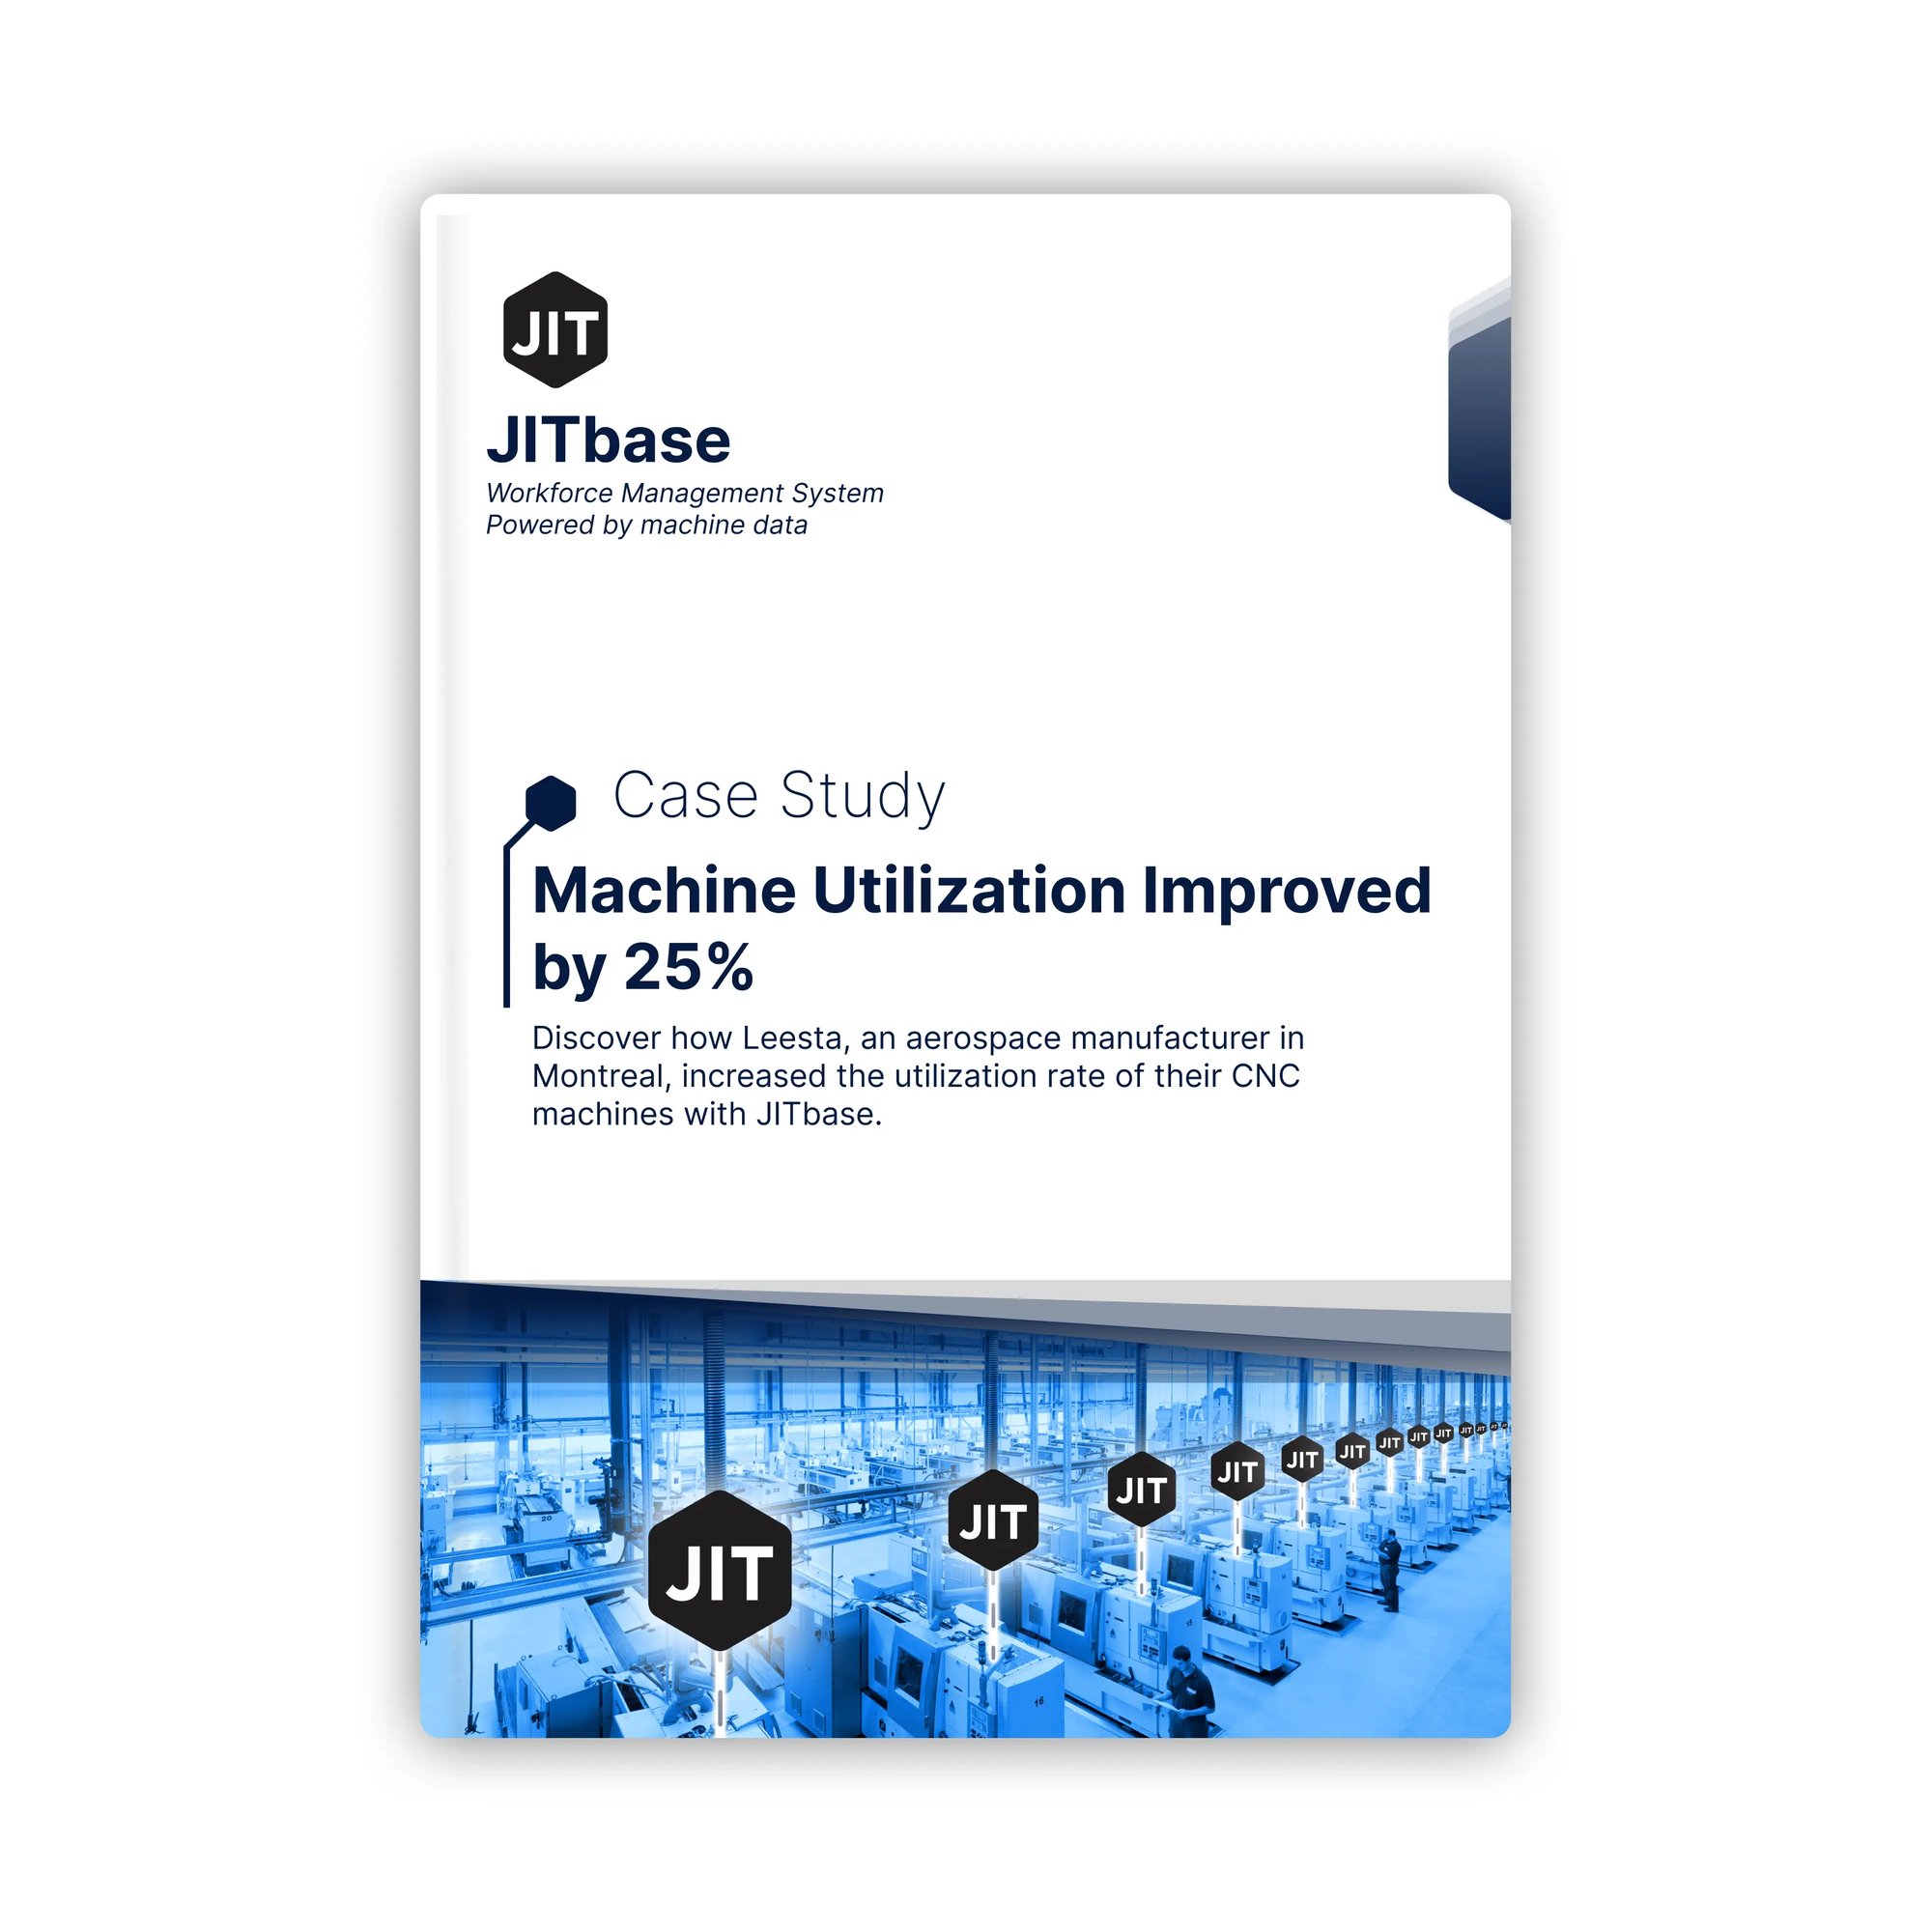 Case Study cover: Machine Utilization Improved by 25%